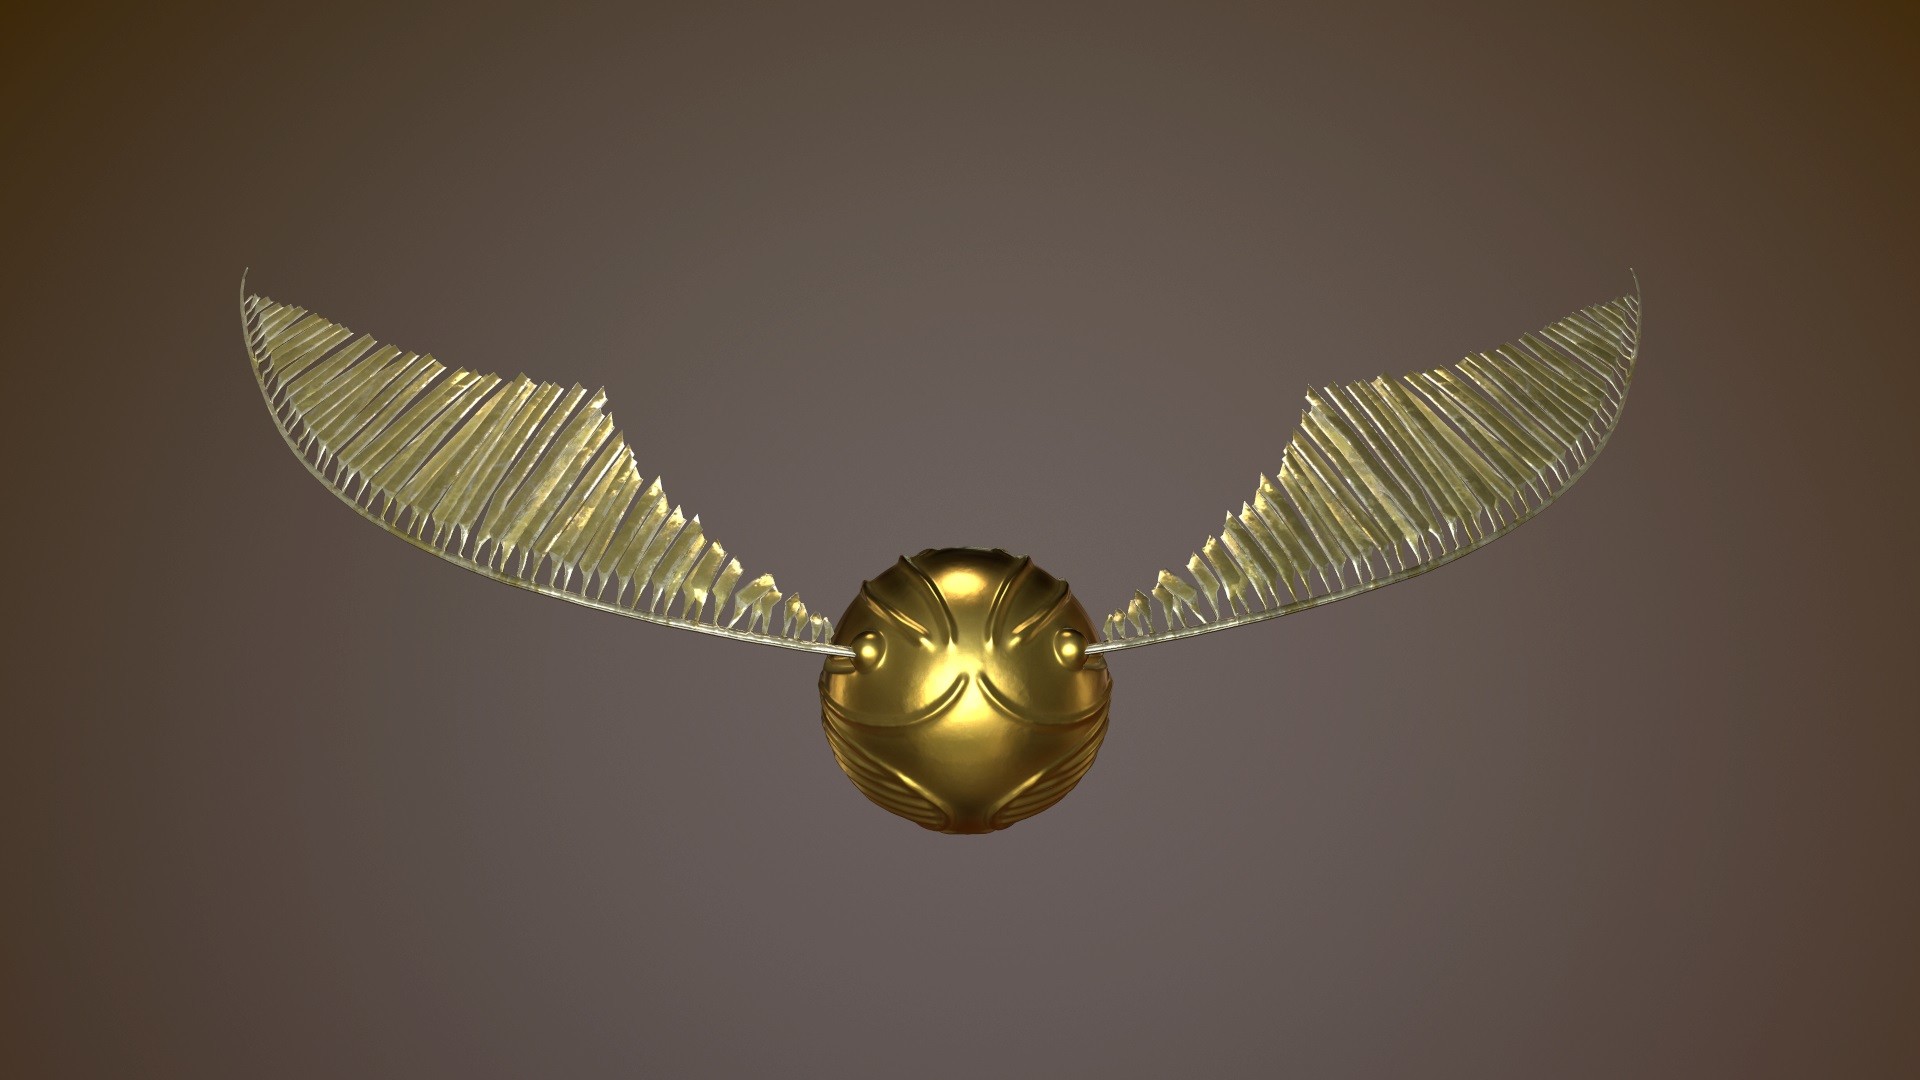 9. "I open at the close" with a small golden snitch - wide 2